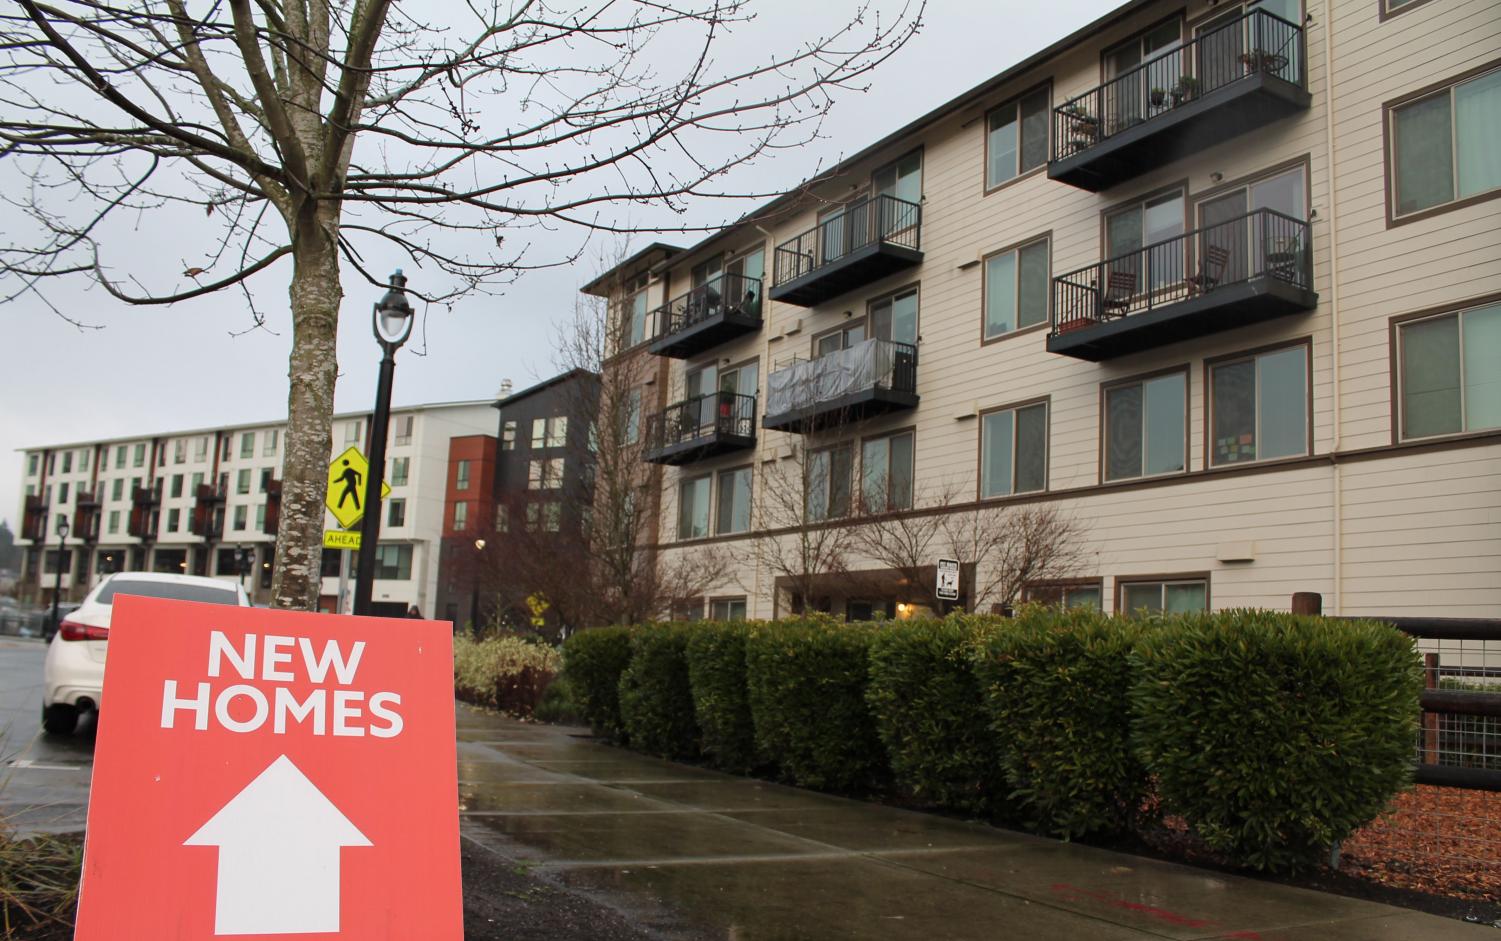 Downtown+Bothell+sign+advertises+real+estate+available+at+The+Landing+townhome+complex+on+Dec.+15.+Photo+by+Sofia+Leotta%0A%0A